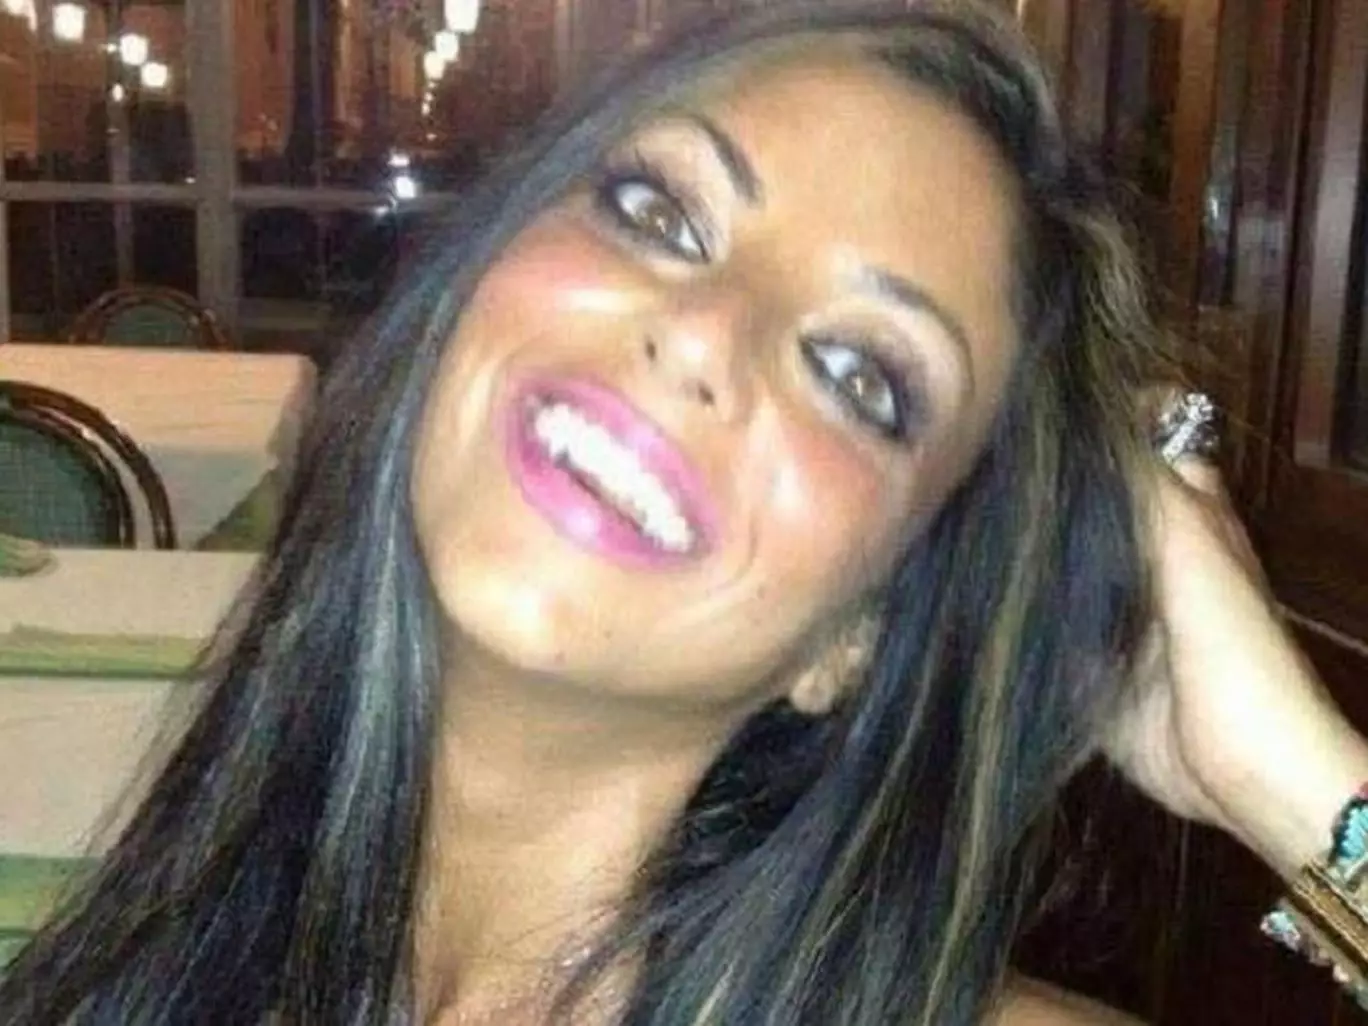 Italian Woman Kills Herself After Her Sex Tape Went Viral